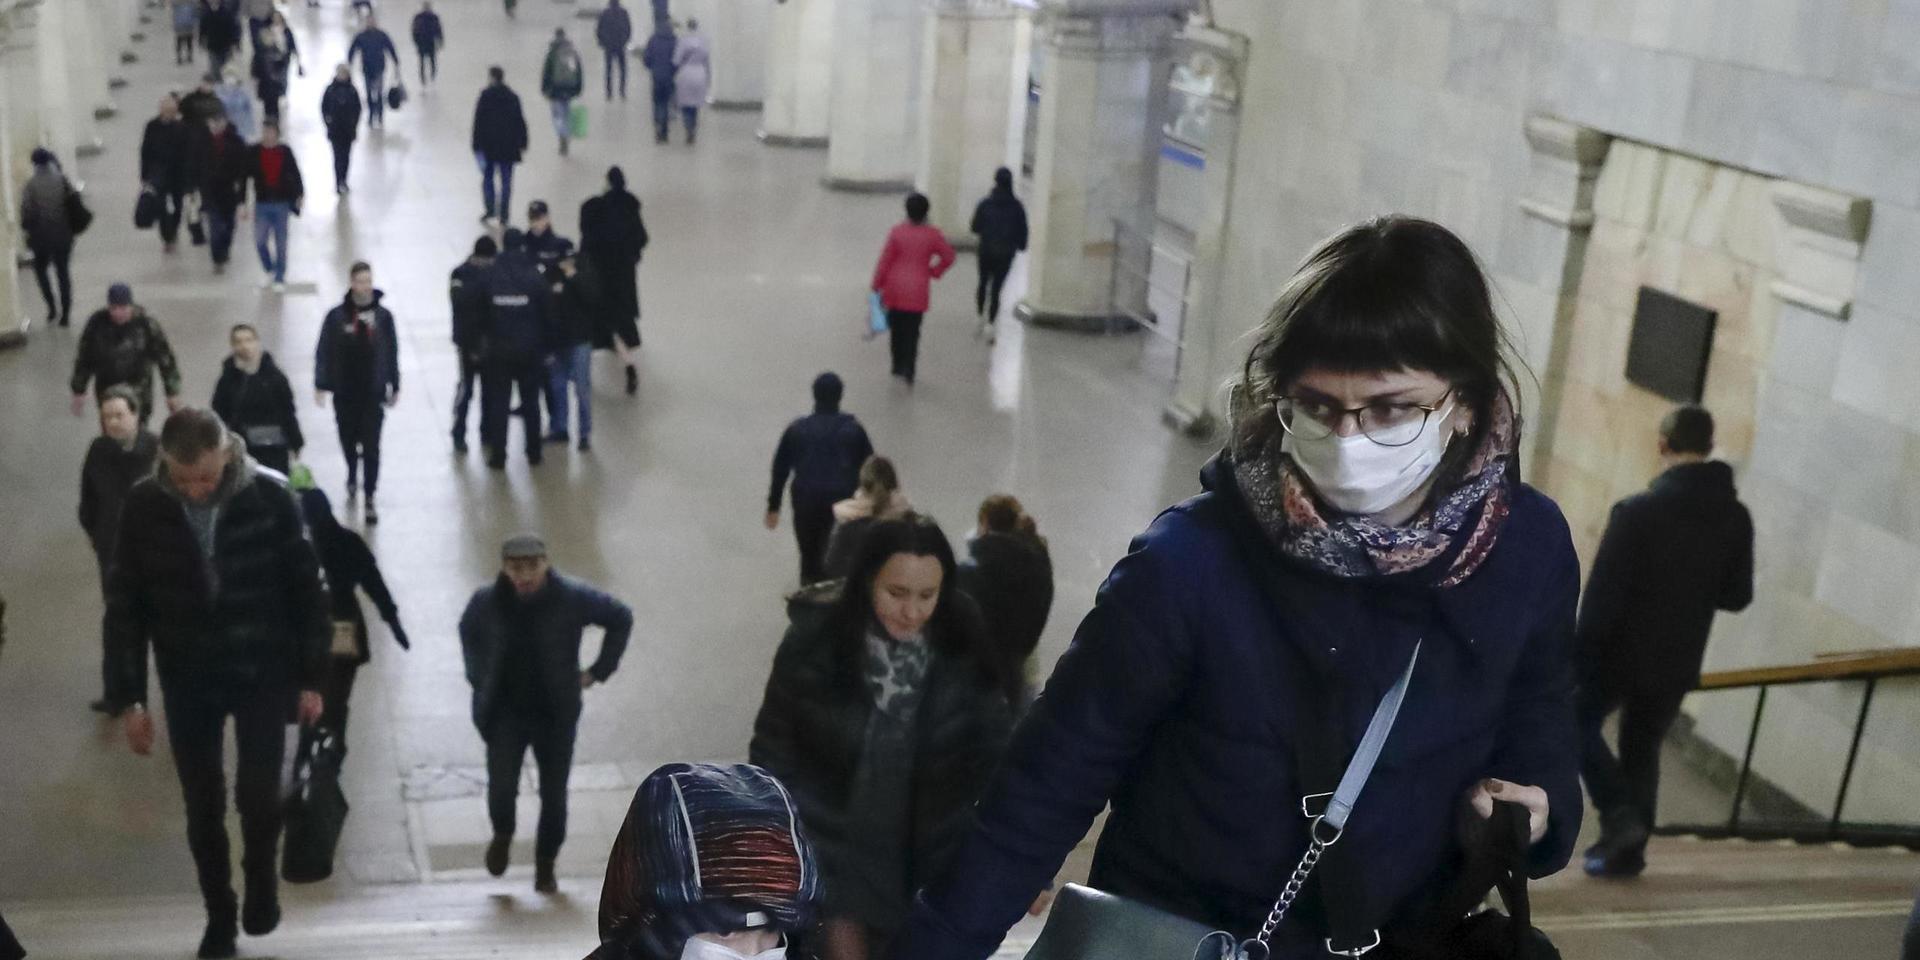 A woman with her child wear medical masks walk inside the Komsomolskaya Metro (subway) station in Moscow, Russia, Wednesday, March 18, 2020. Authorities in Russia are taking vast measures to prevent the spread of the disease in the country. The measures include closing the border for all foreigners, shutting down schools for three weeks, sweeping testing and urging people to stay home. For most people, the new coronavirus causes only mild or moderate symptoms. For some it can cause more severe illness. (AP Photo/Pavel Golovkin)  XAZ112